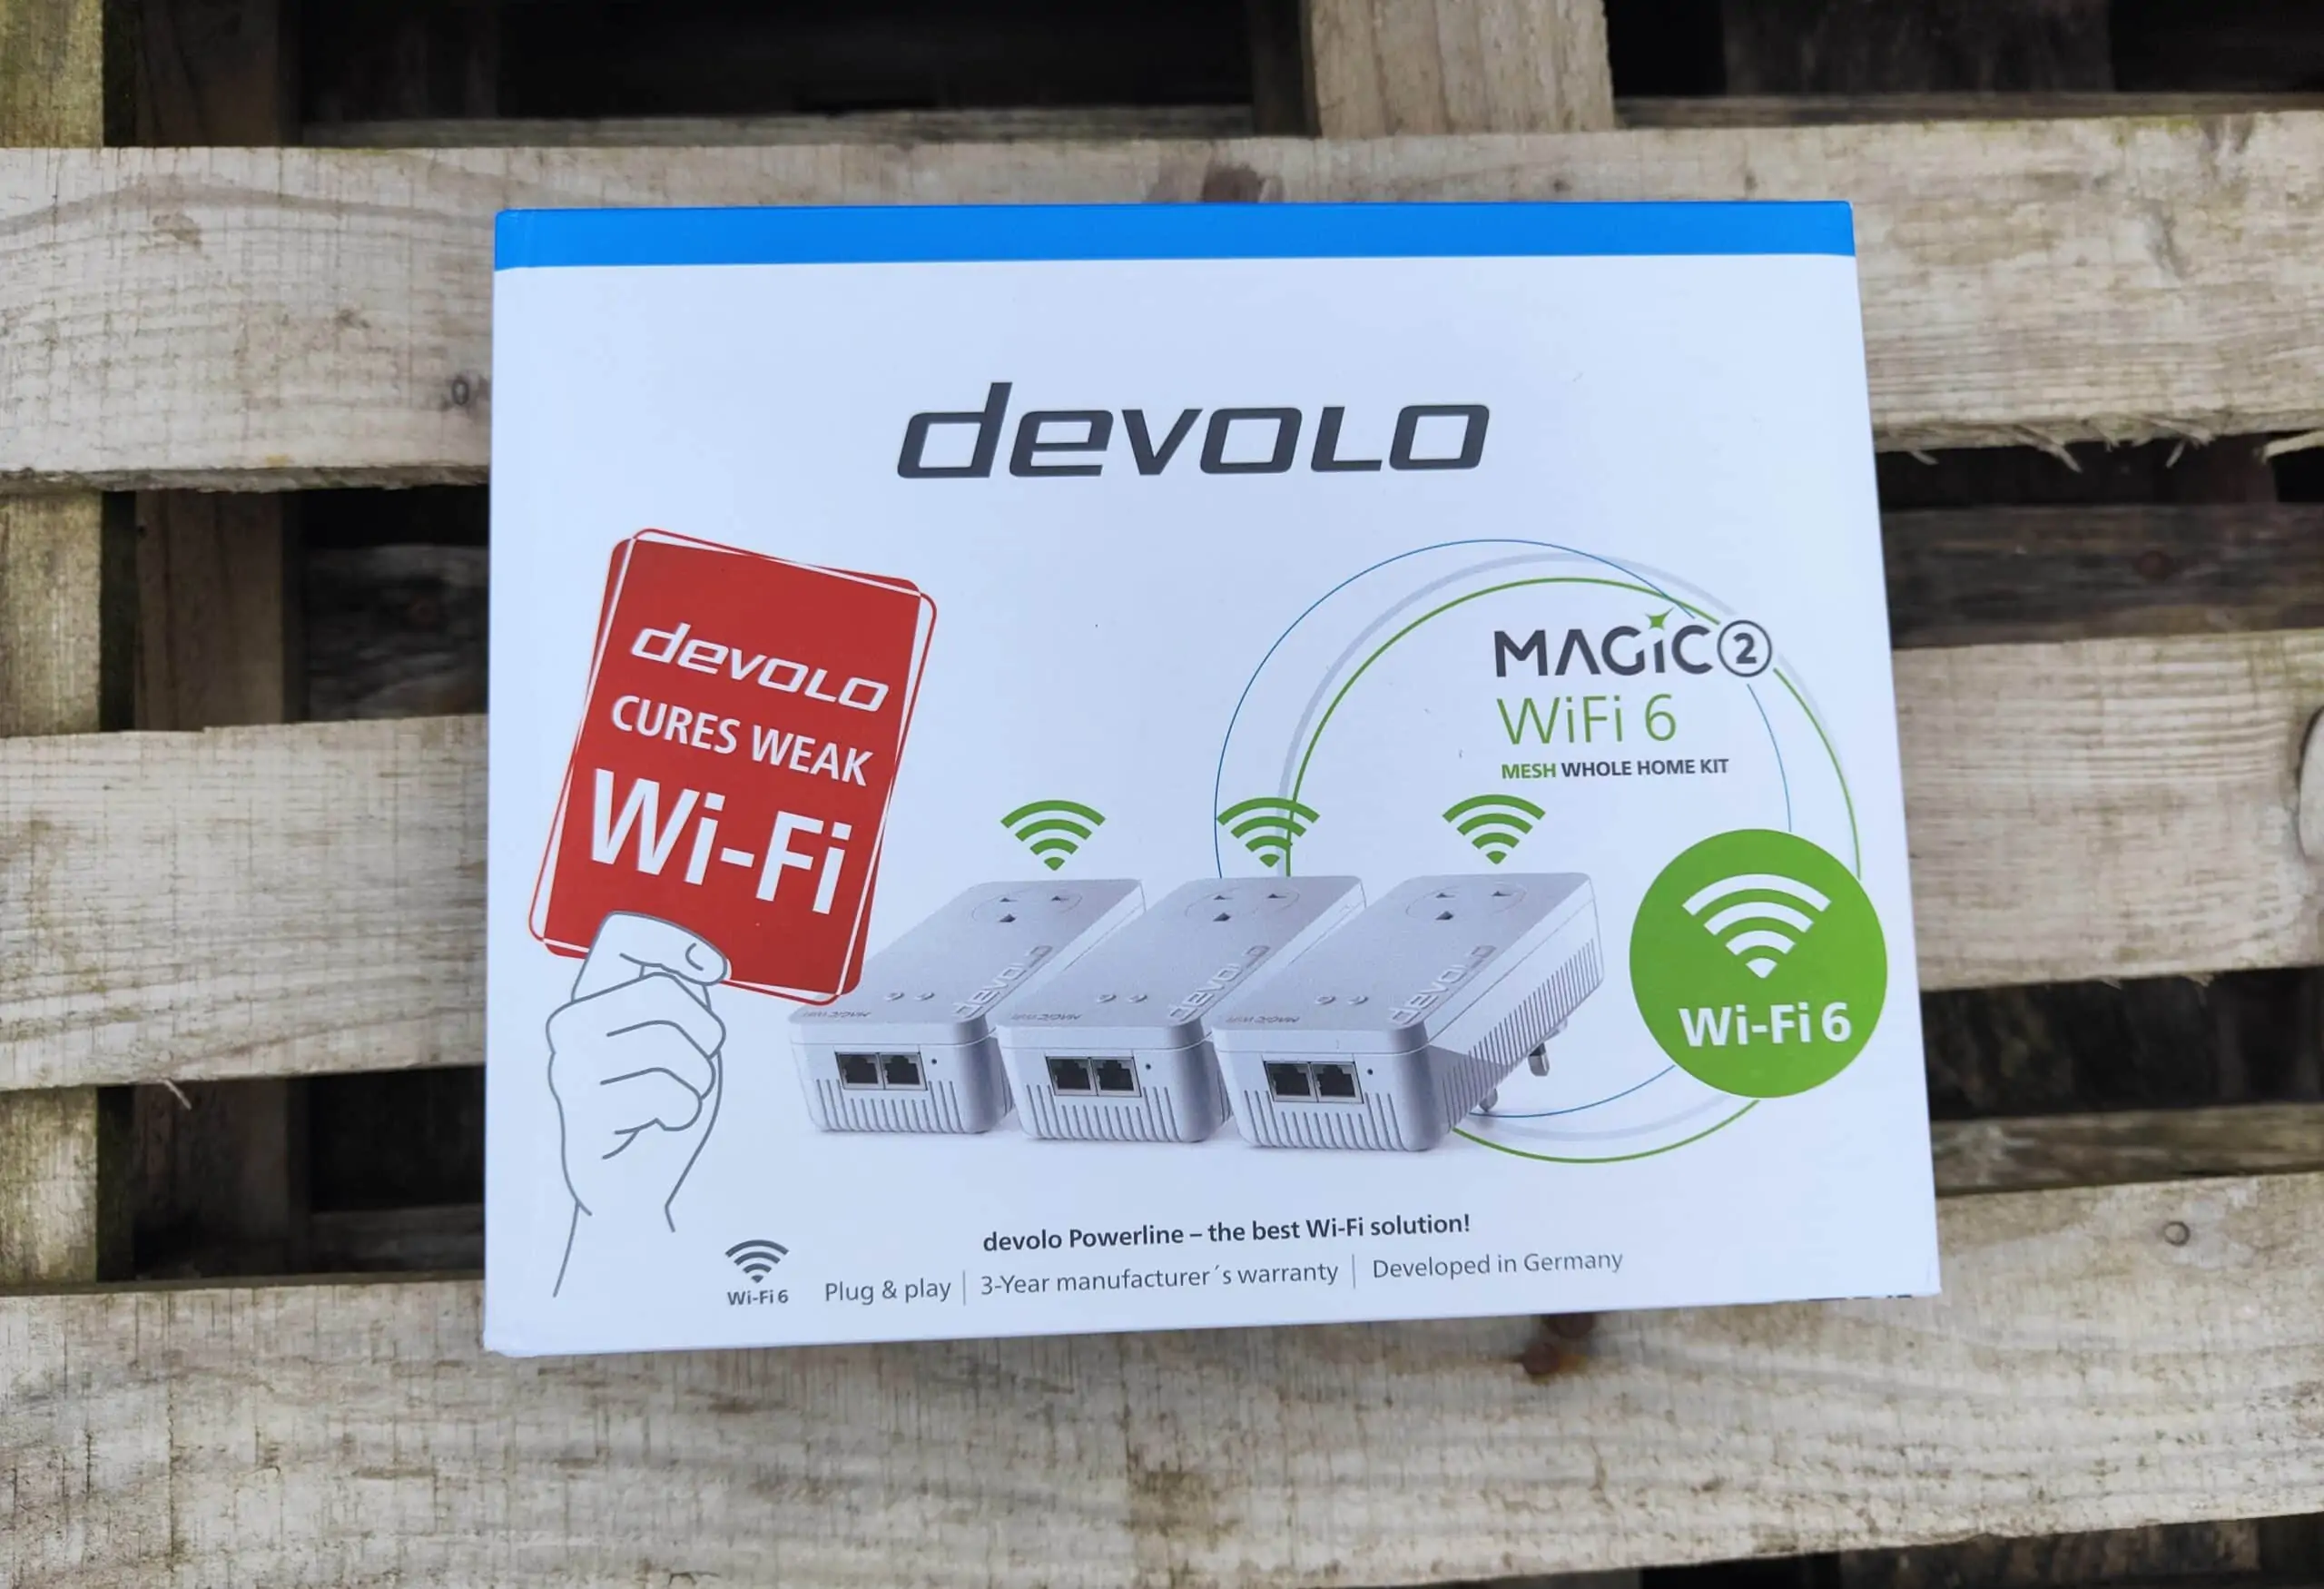 Devolo Magic 2 WiFi 6 Mesh Whole Home Kit Review – A tri-band mesh system using powerline as the backhaul